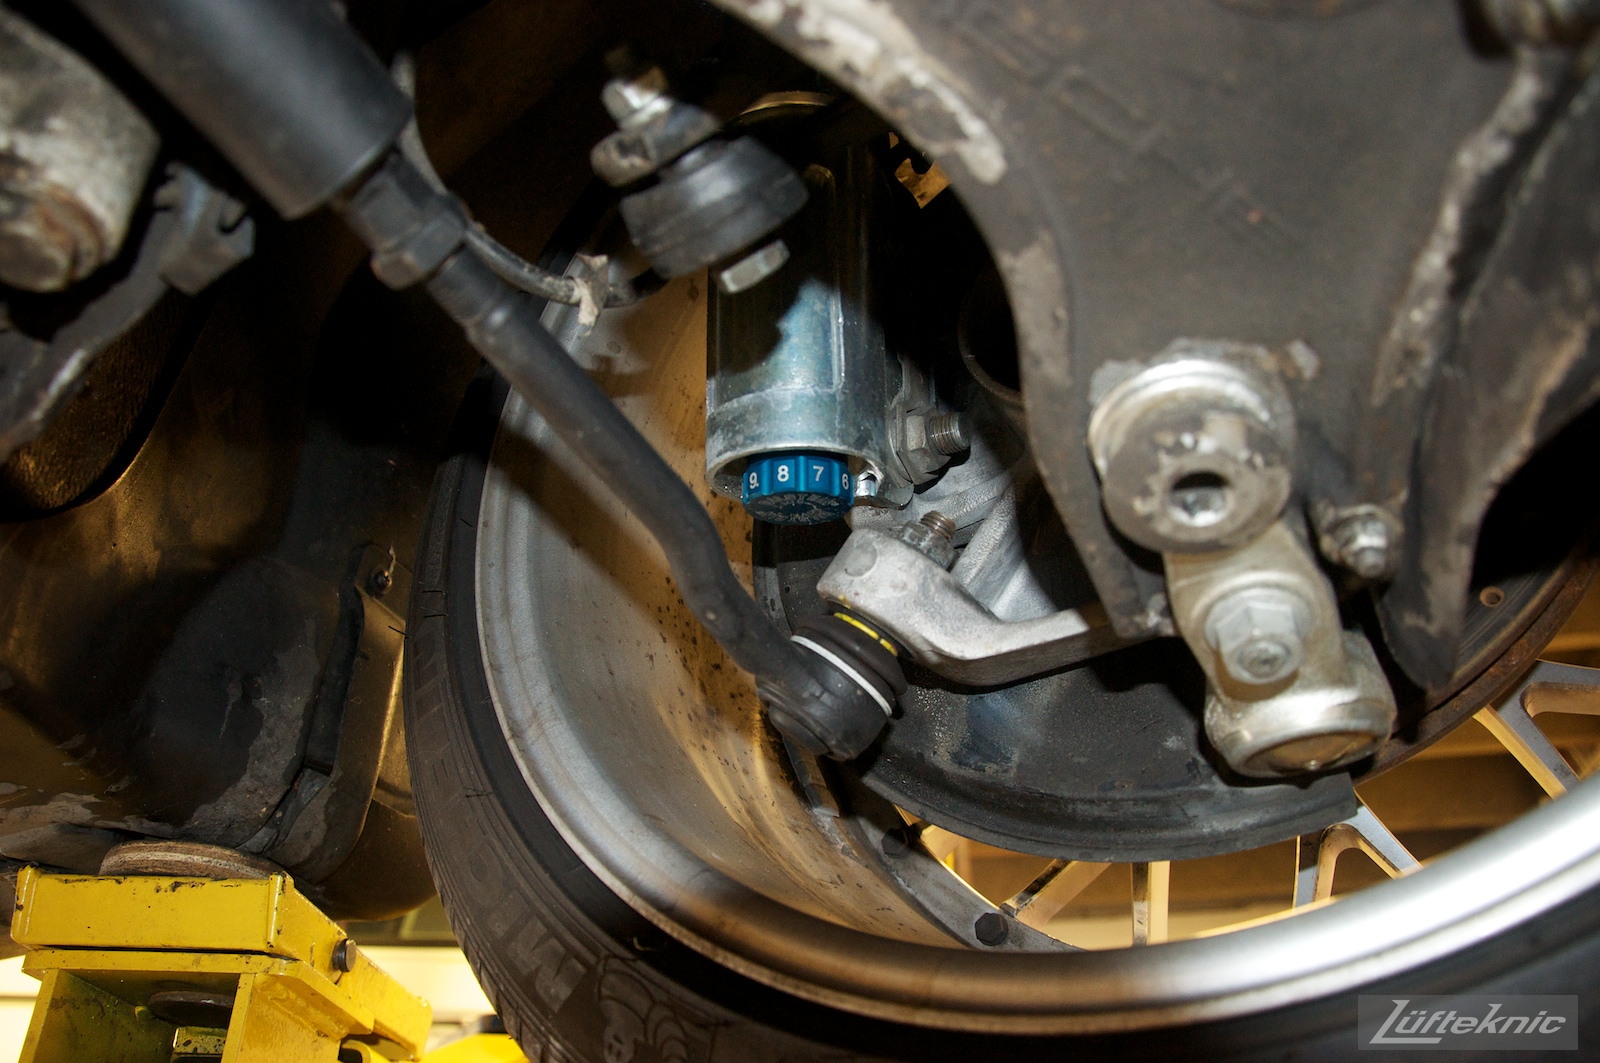 Suspension detail shots with RSR uprights on a 993 Turbo from underneath.